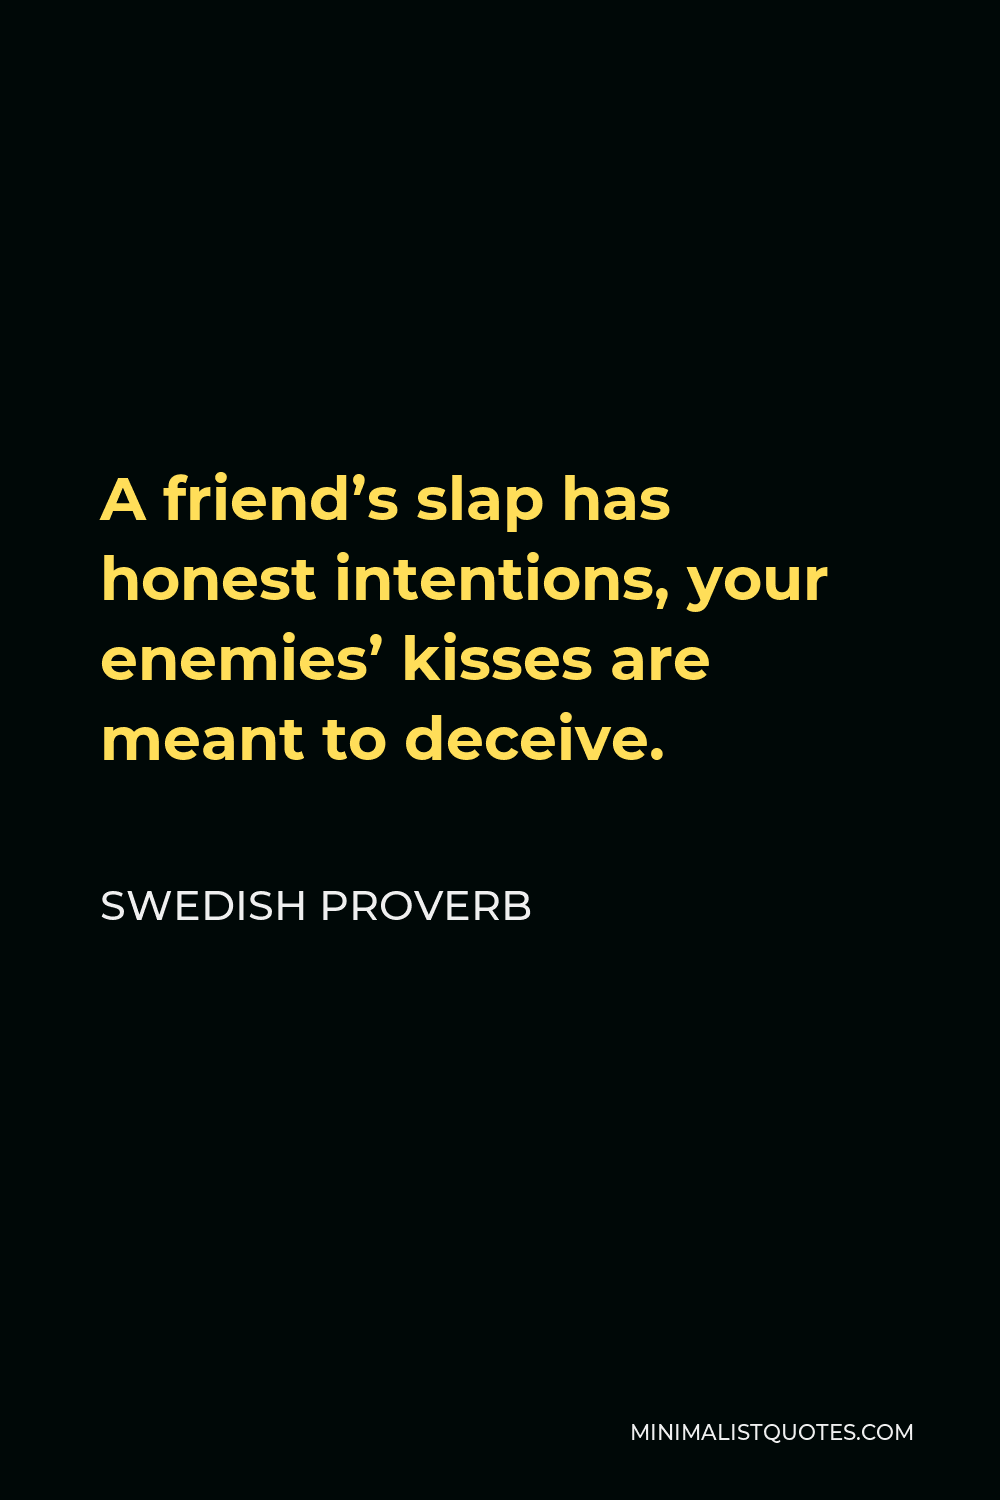 Swedish Proverb Quote - A friend’s slap has honest intentions, your enemies’ kisses are meant to deceive.